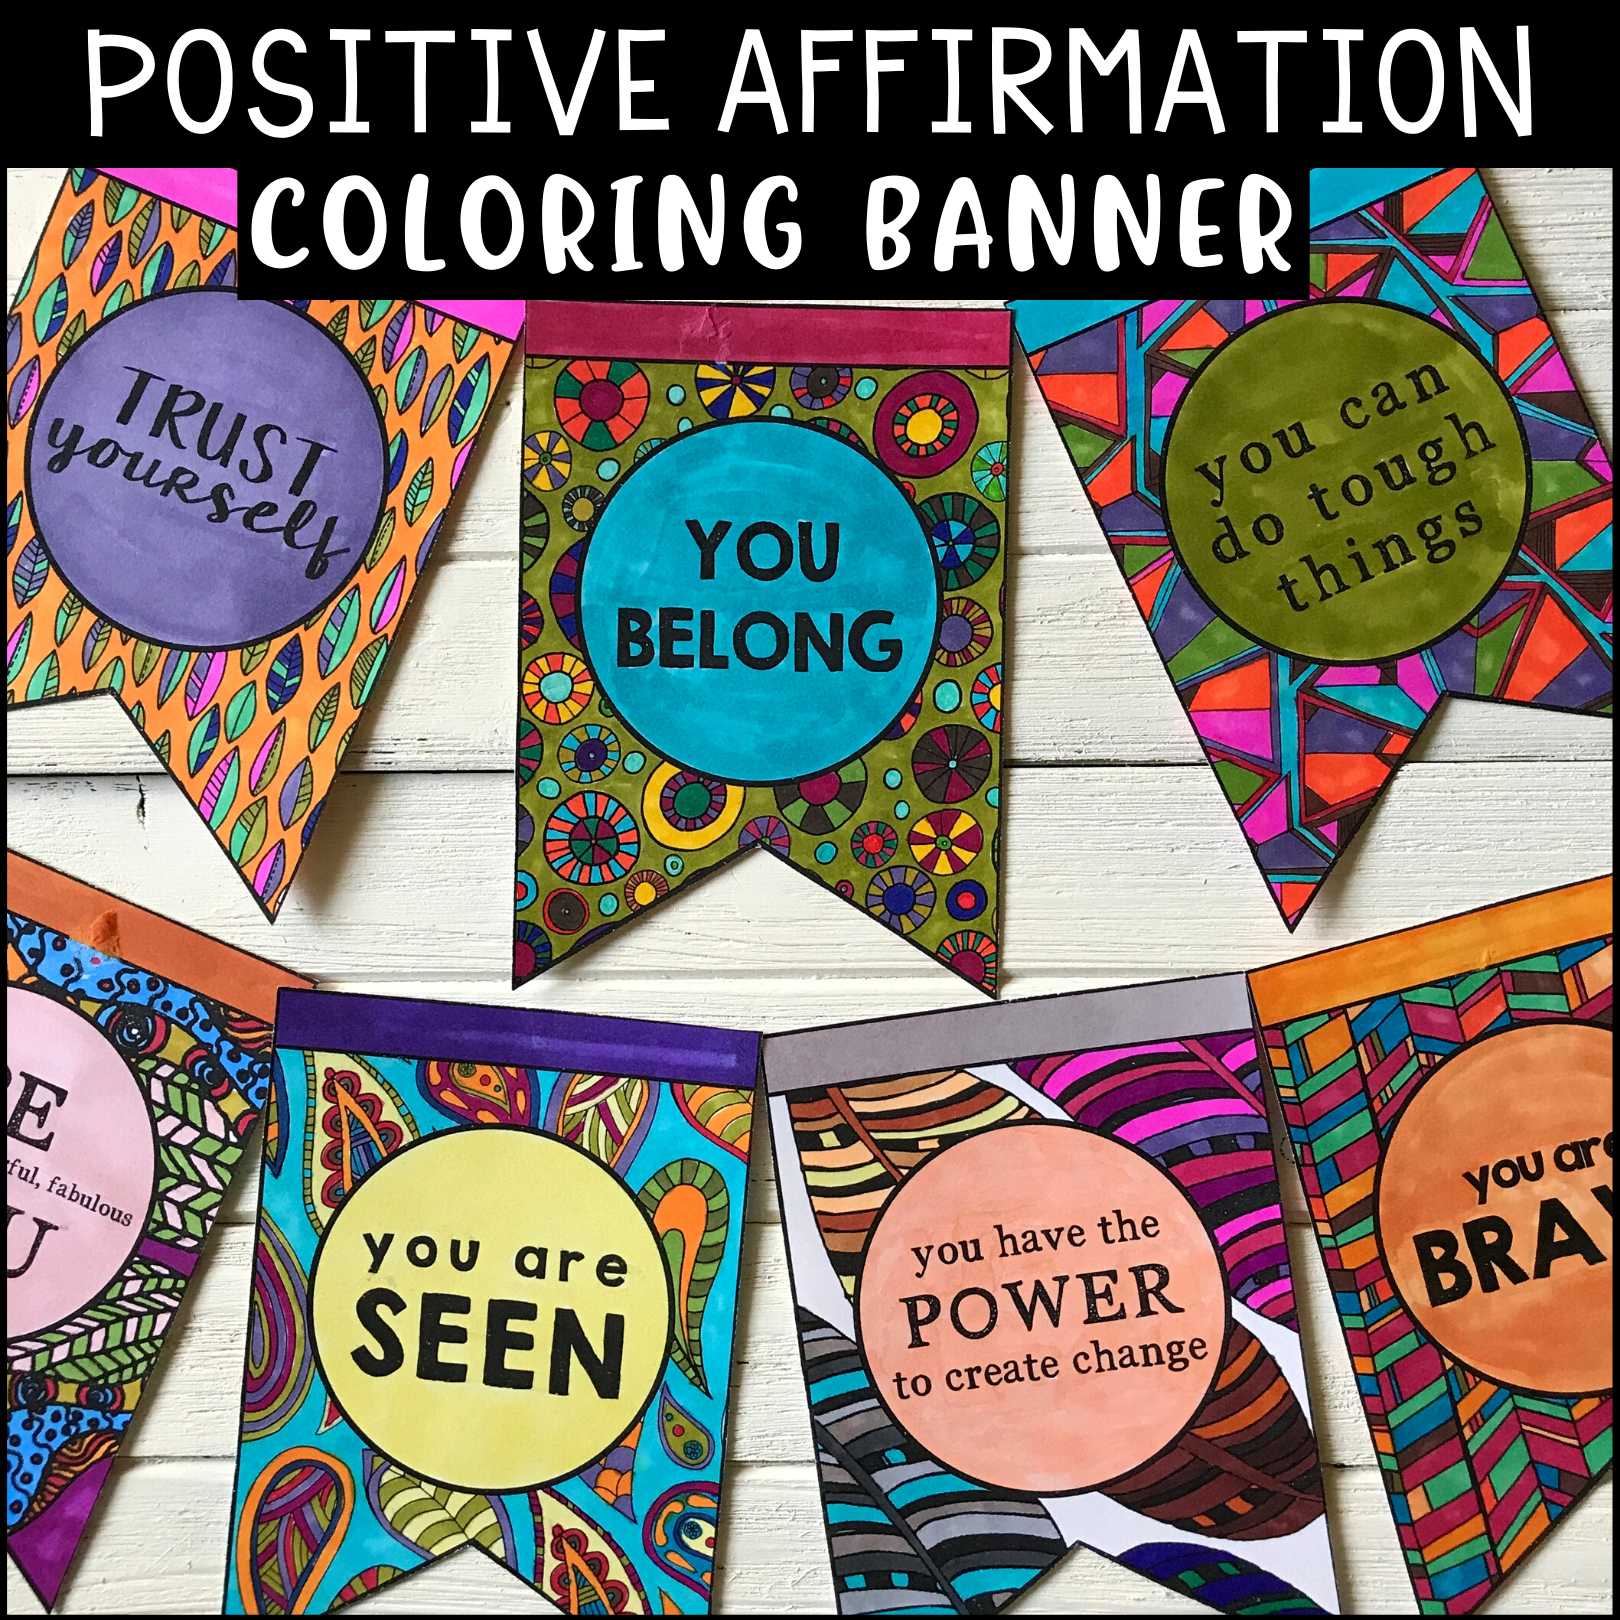 Positive Affirmation Coloring Banner Classroom Decor and SEL Activity